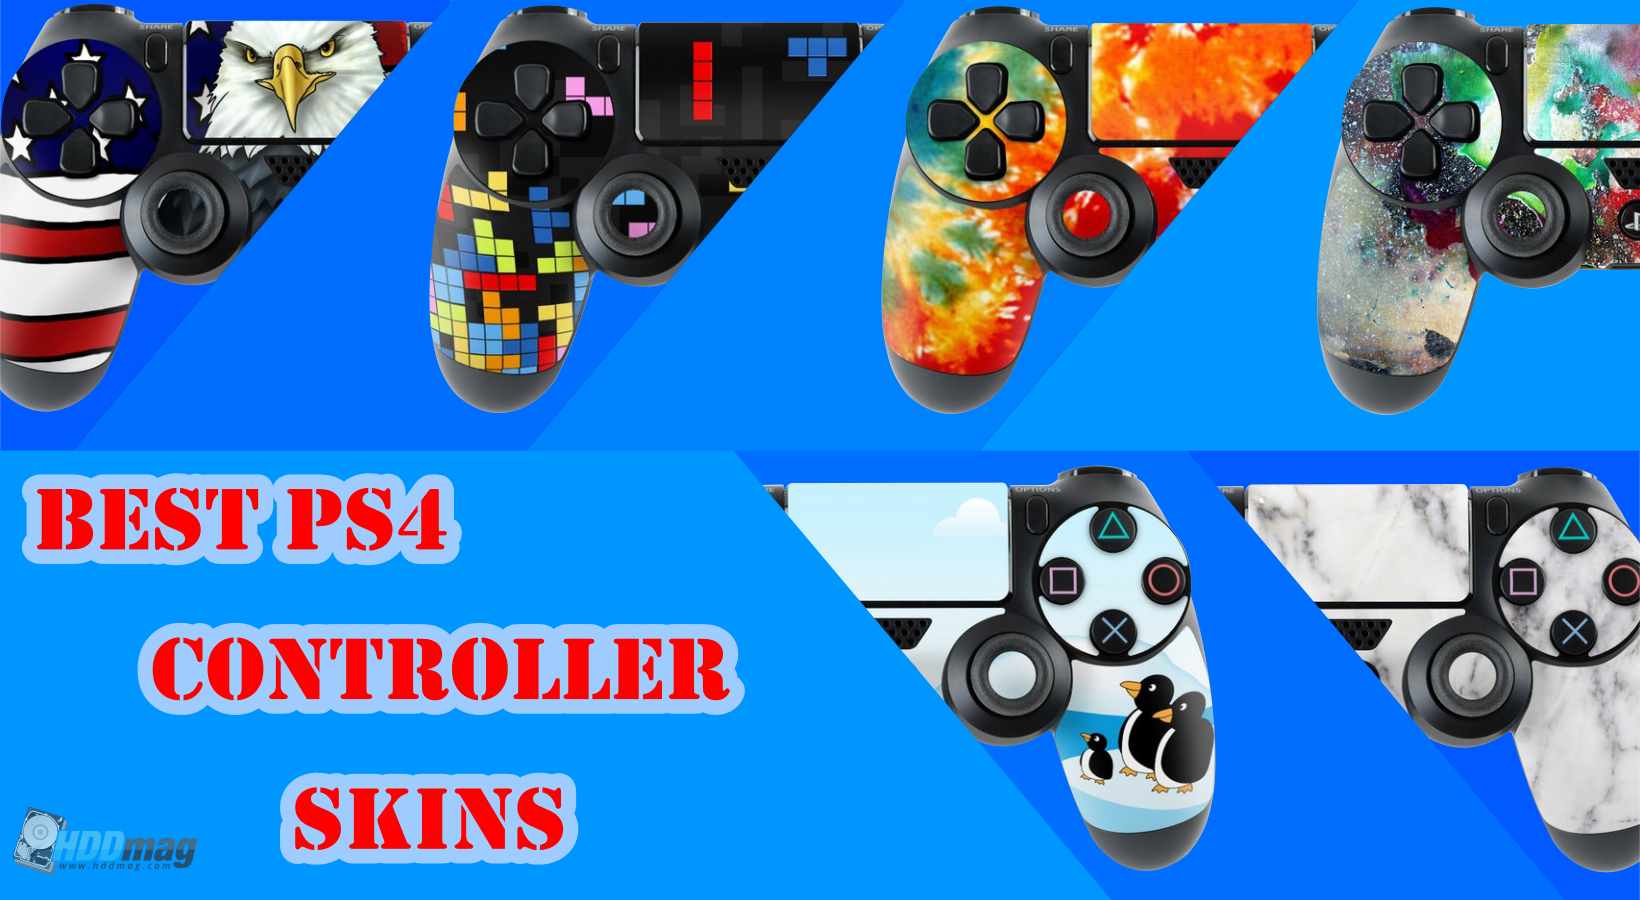 Best PS4 Console and PS4 Controller Skins